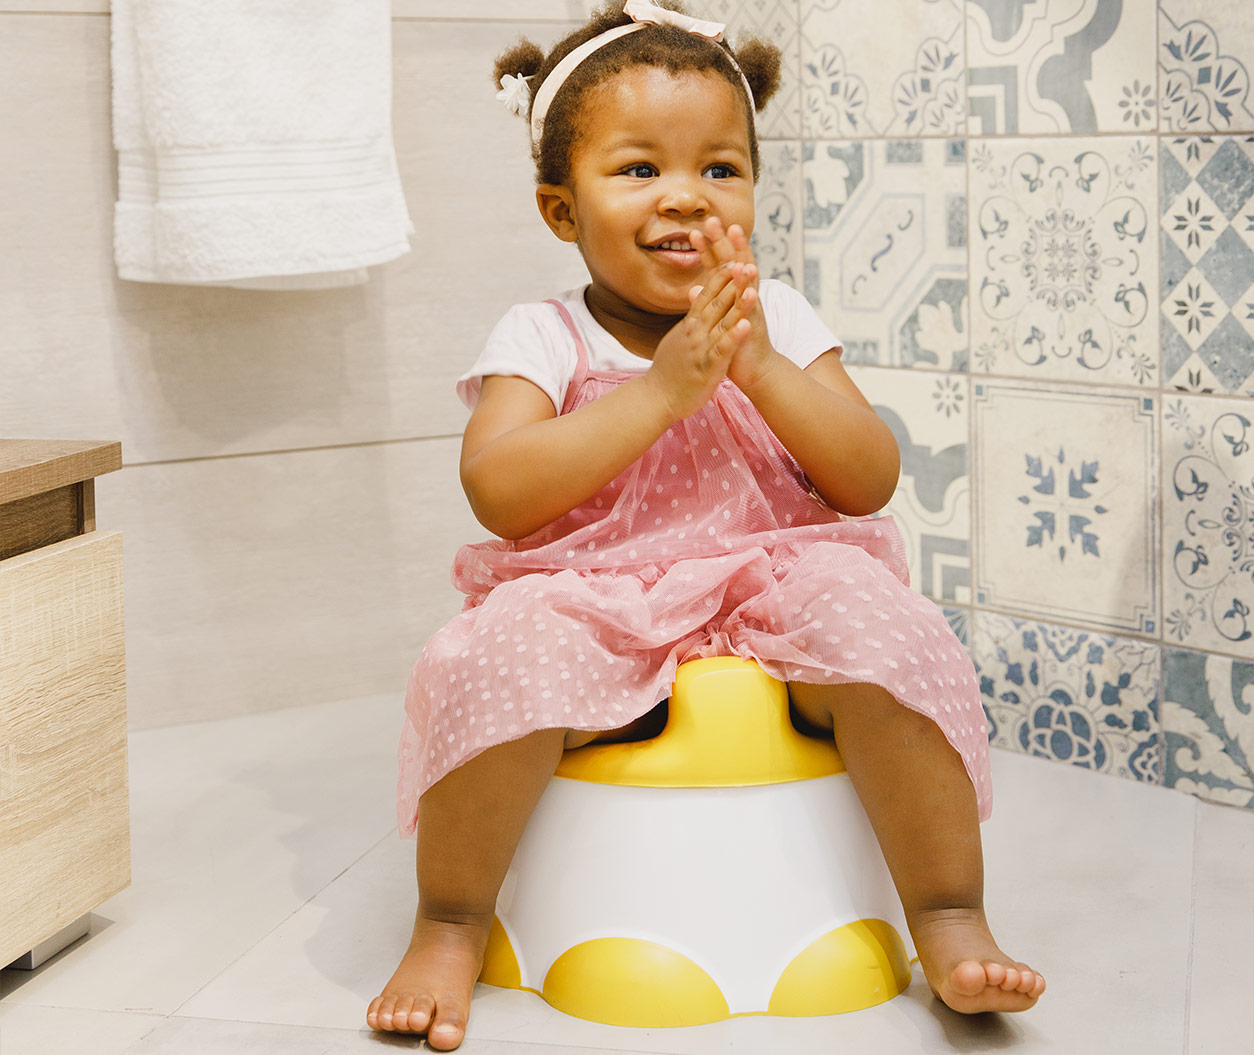 toilet training with baby Toilet training baby